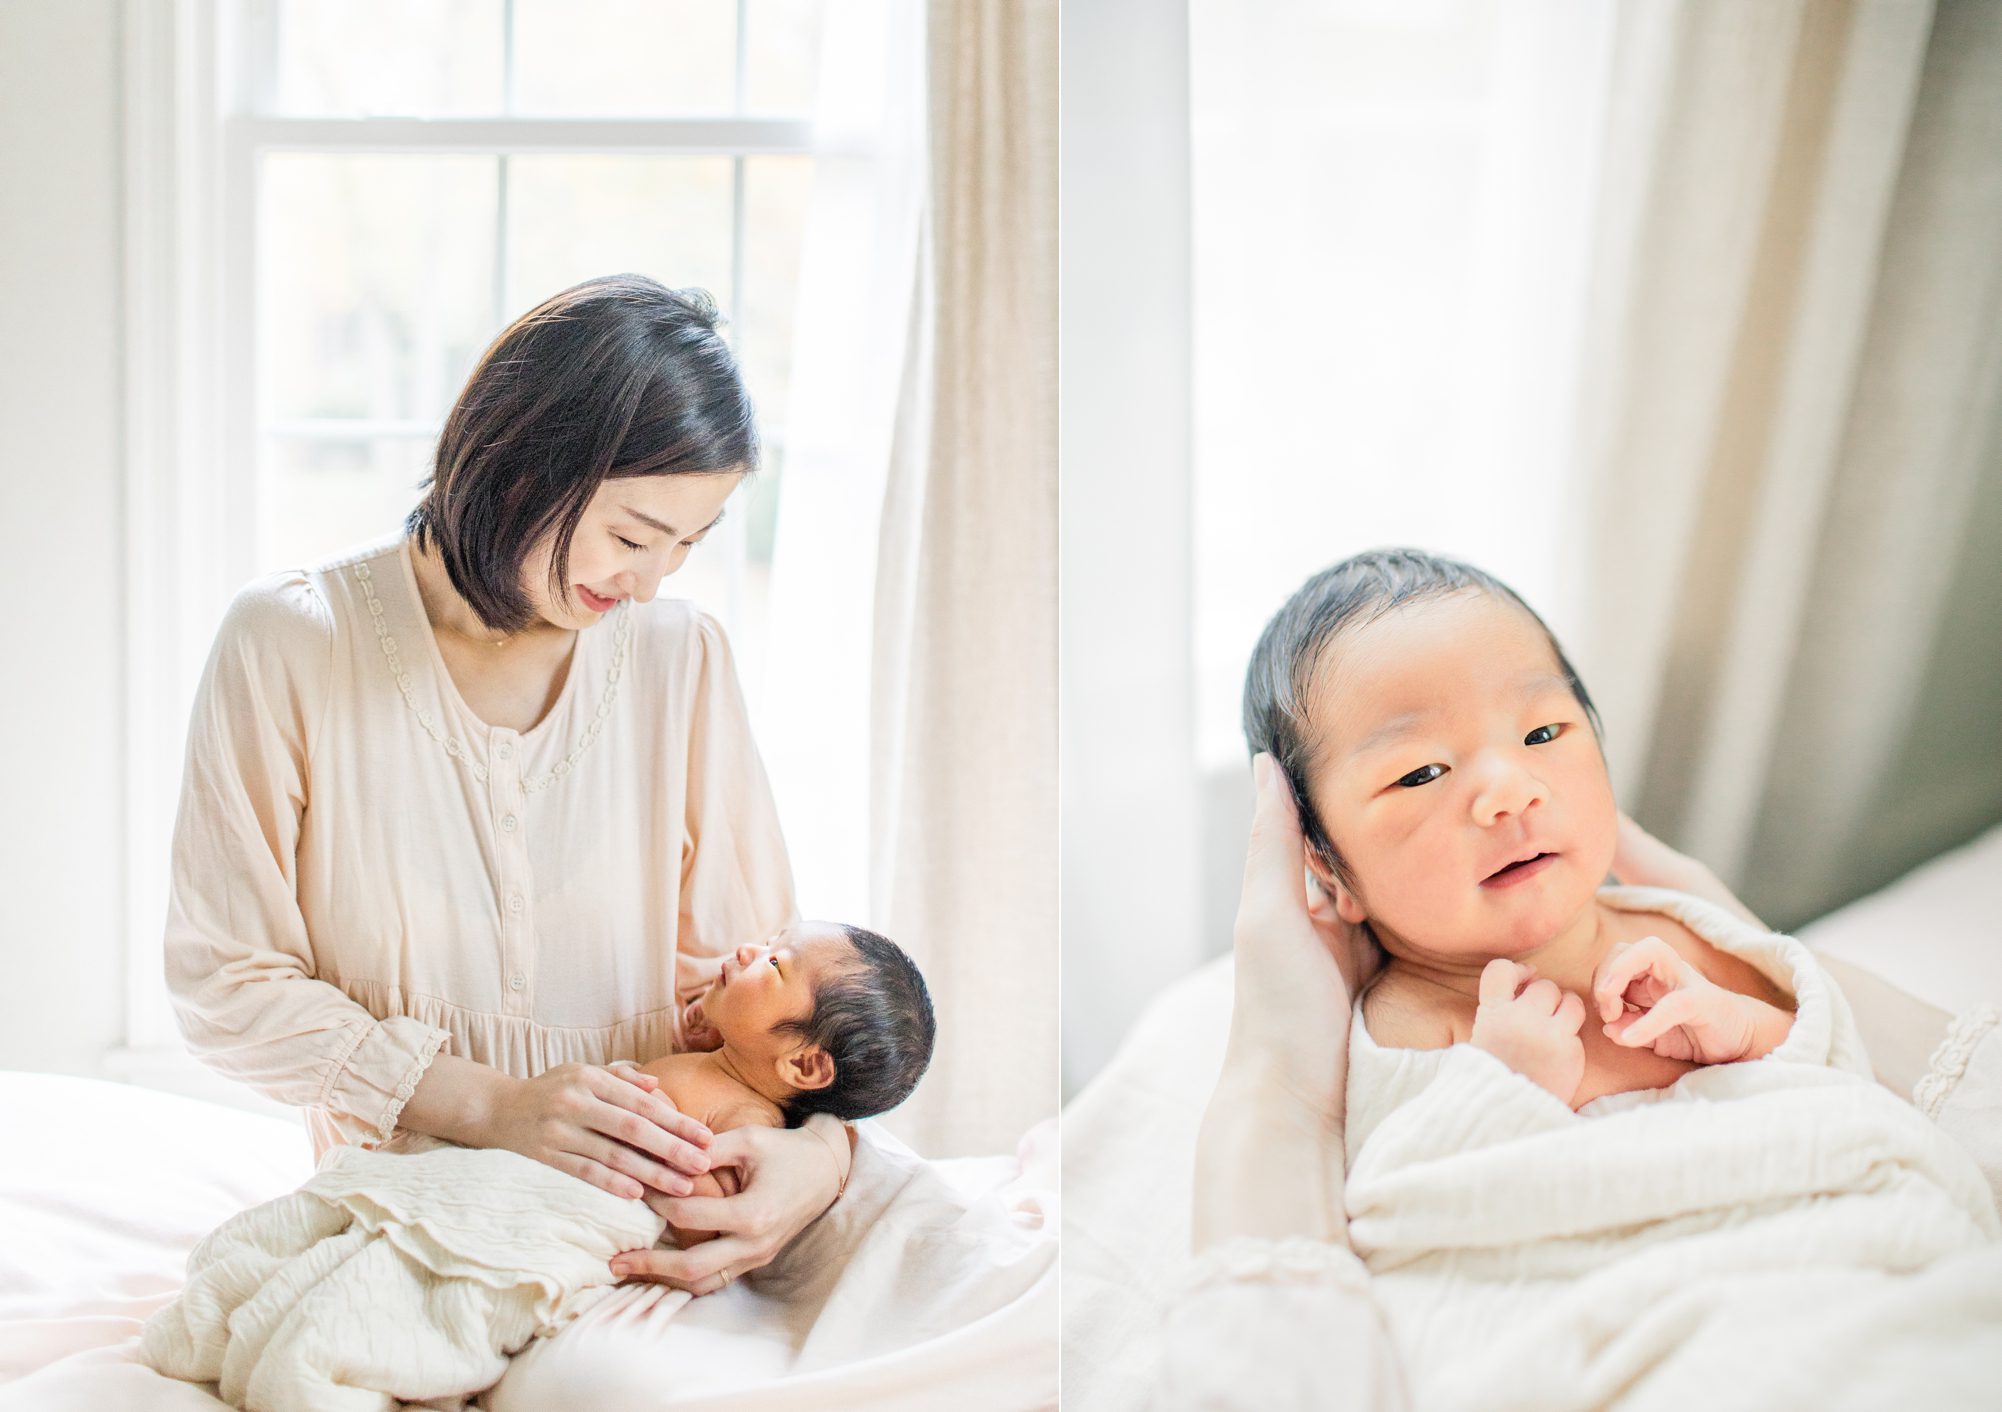 Mom holding baby on bed during newborn photo shoot. Photo by LRG Portraits.